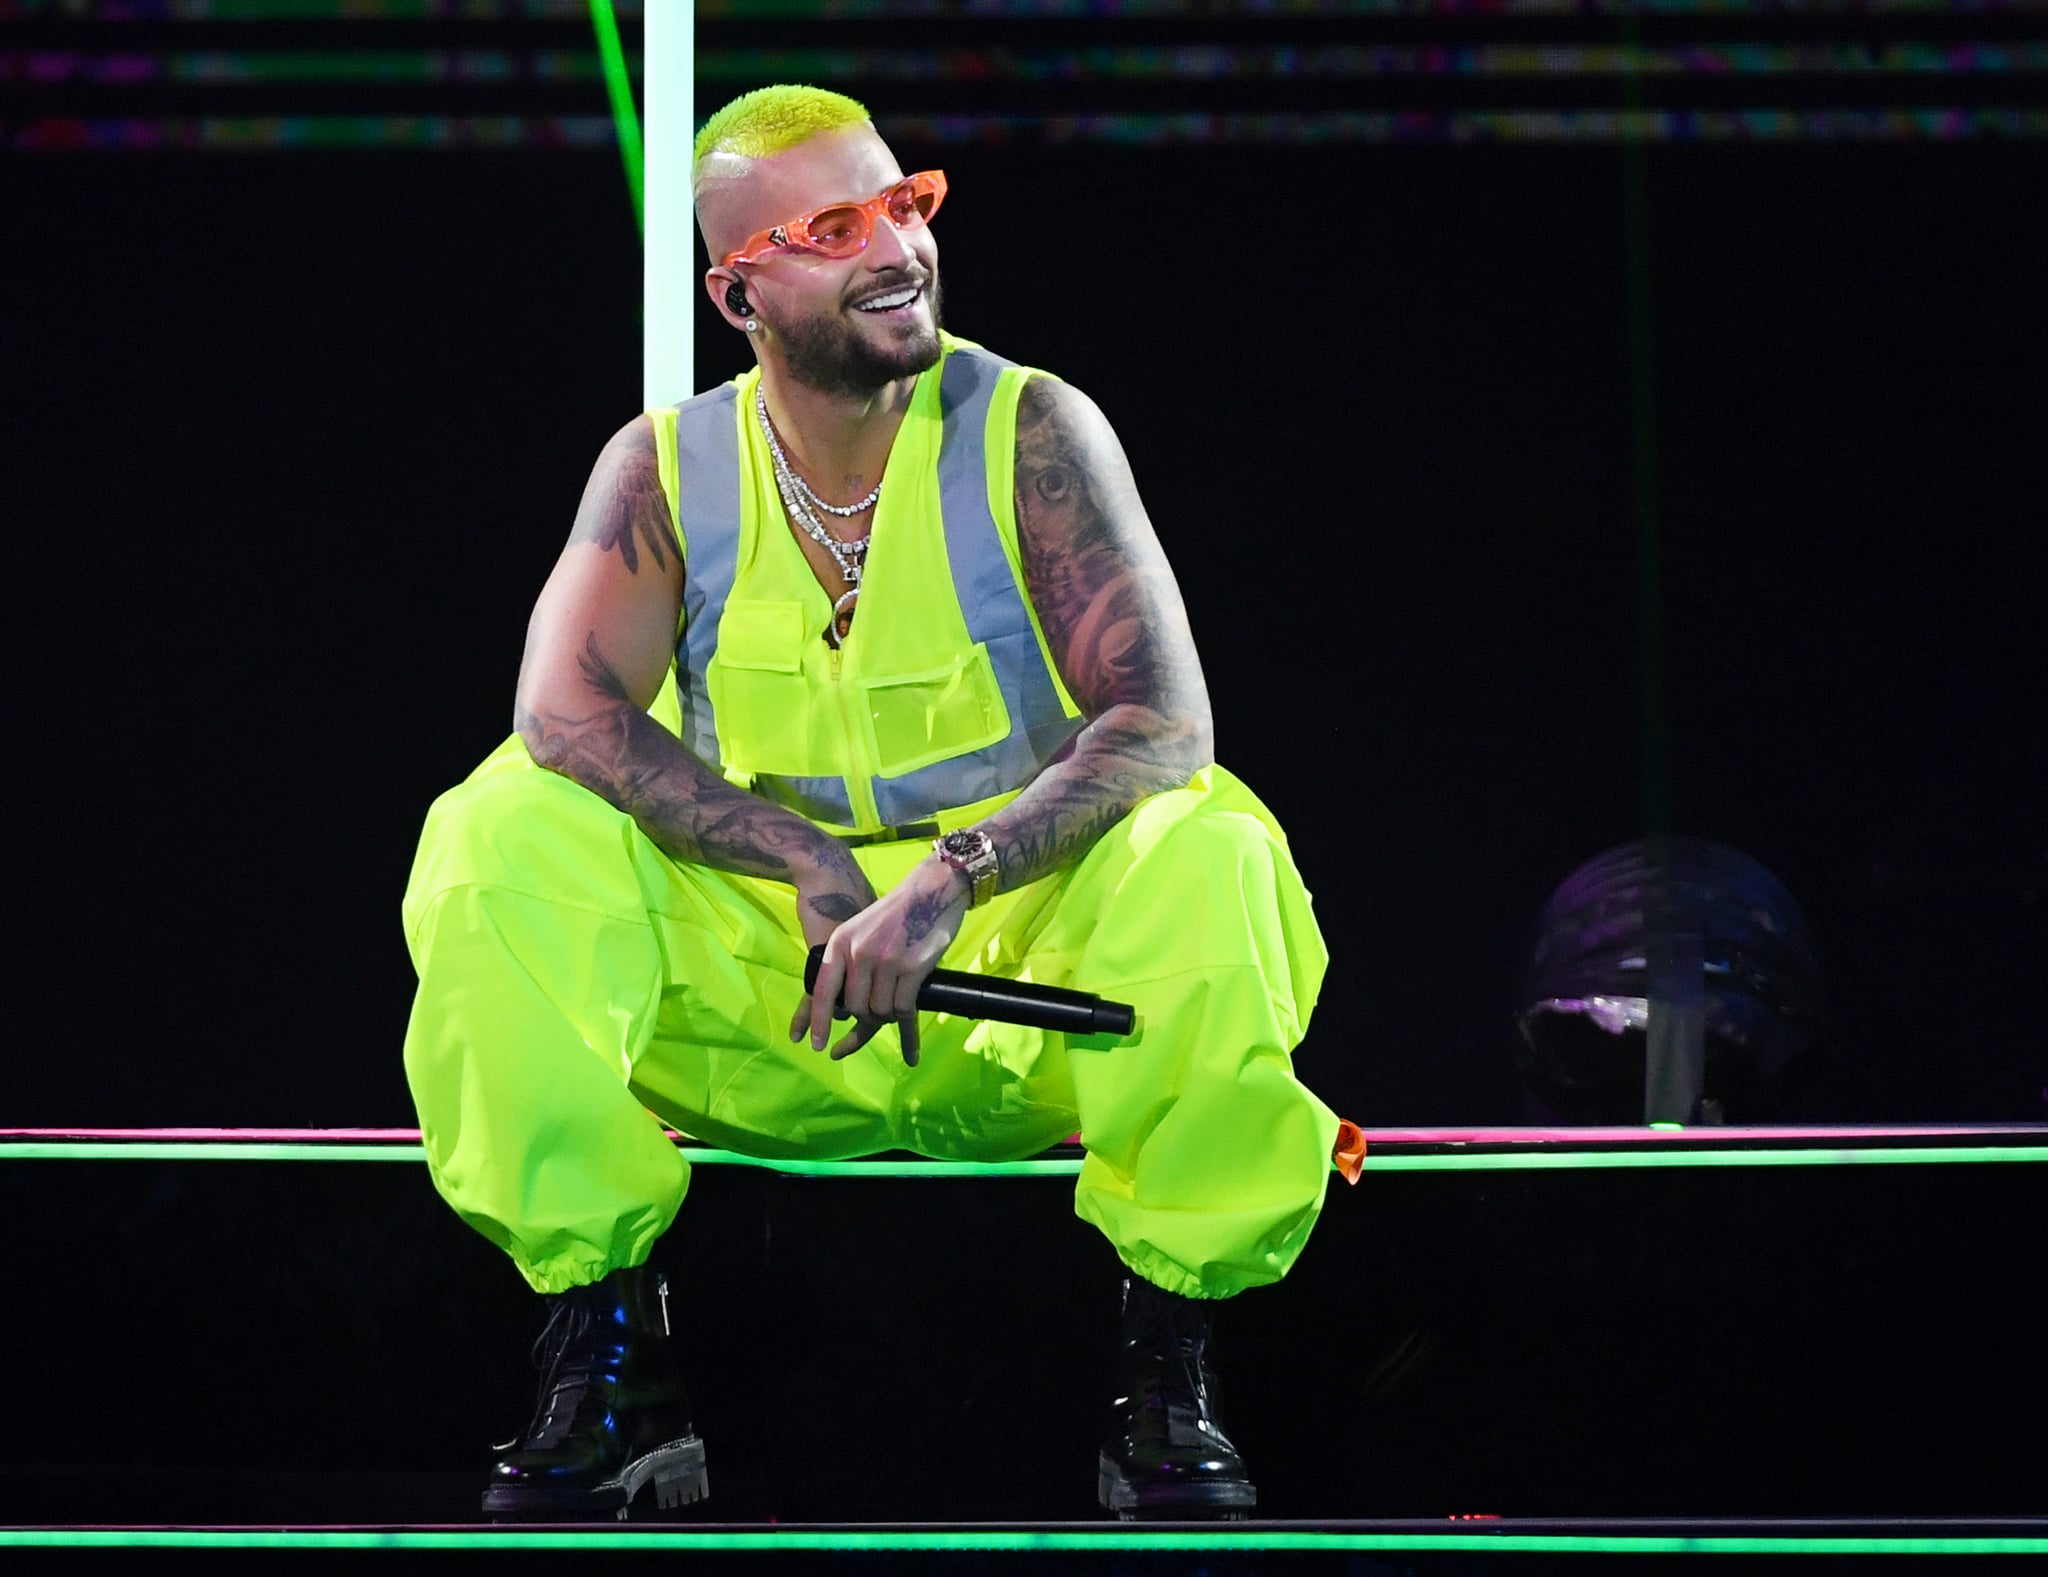 LAS VEGAS, NEVADA - SEPTEMBER 14:  Singer/songwriter Maluma performs at the Mandalay Bay Events Center on September 14, 2019 in Las Vegas, Nevada.  (Photo by Ethan Miller/Getty Images)